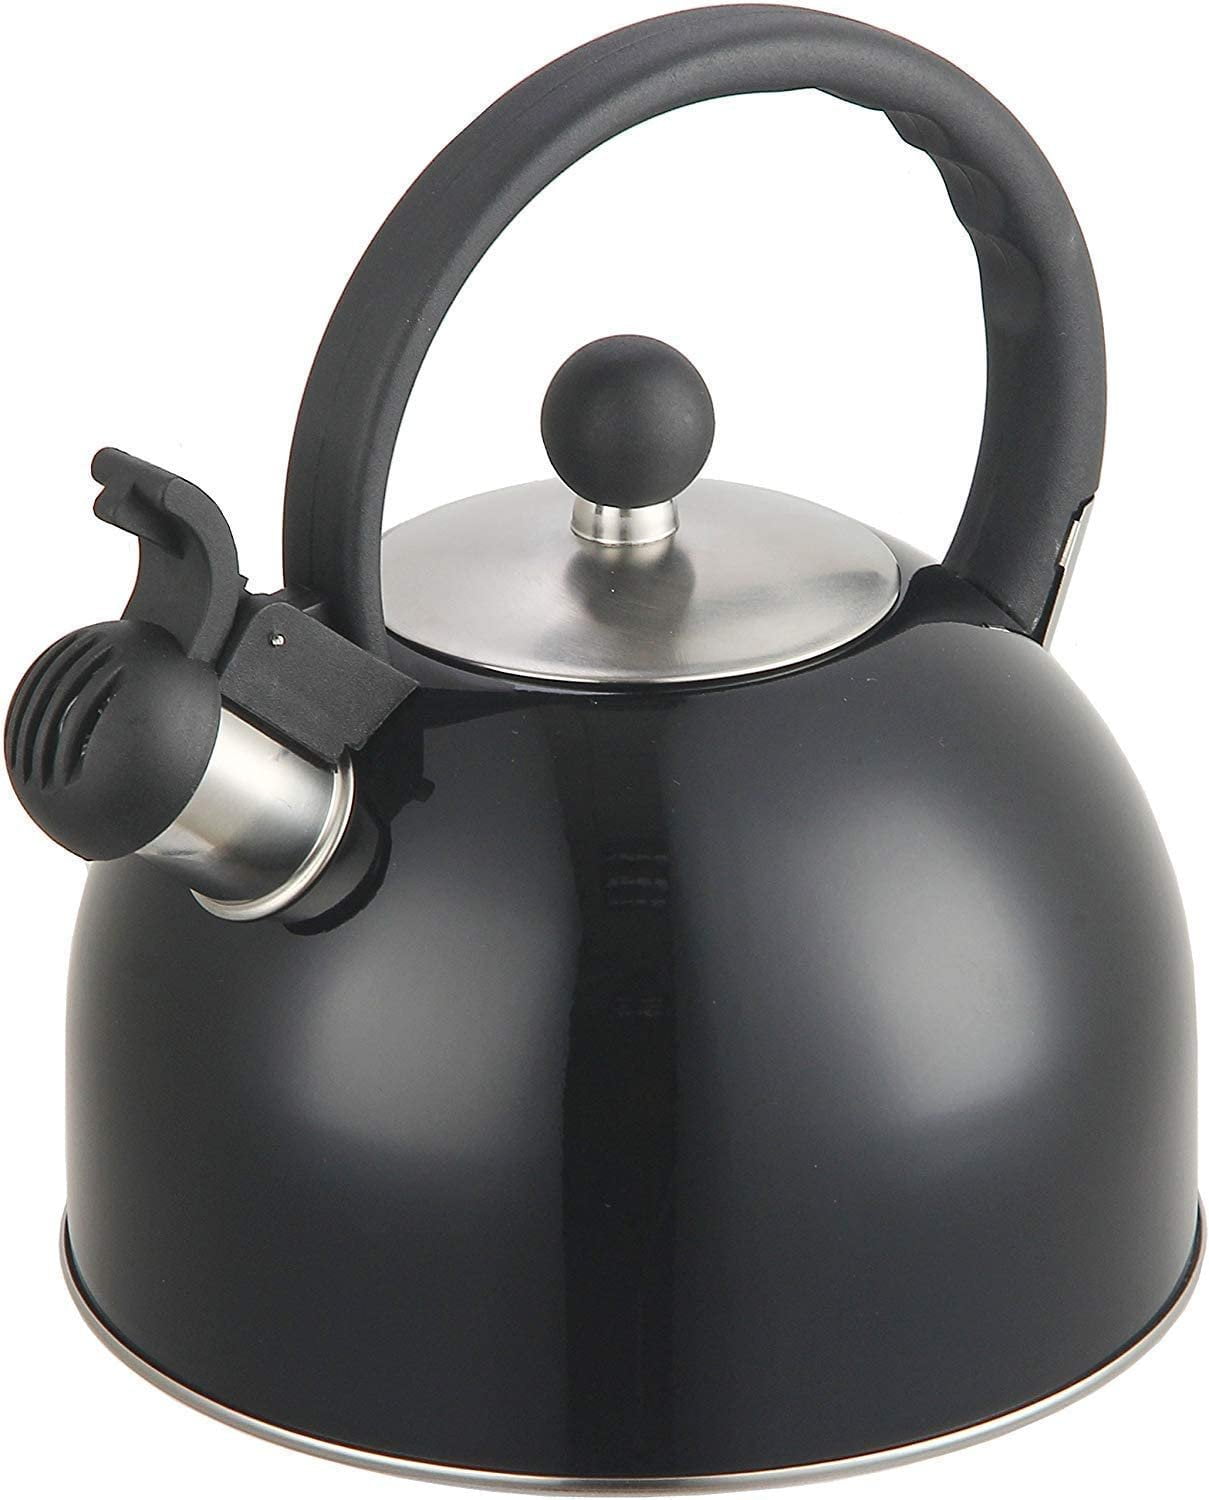 DFL 2 Liter Stainless Steel Whistling Tea Kettle - Modern Stainless Steel Whistling Tea Pot for Stovetop with Cool Grip Ergonomic Handle (2L Black)